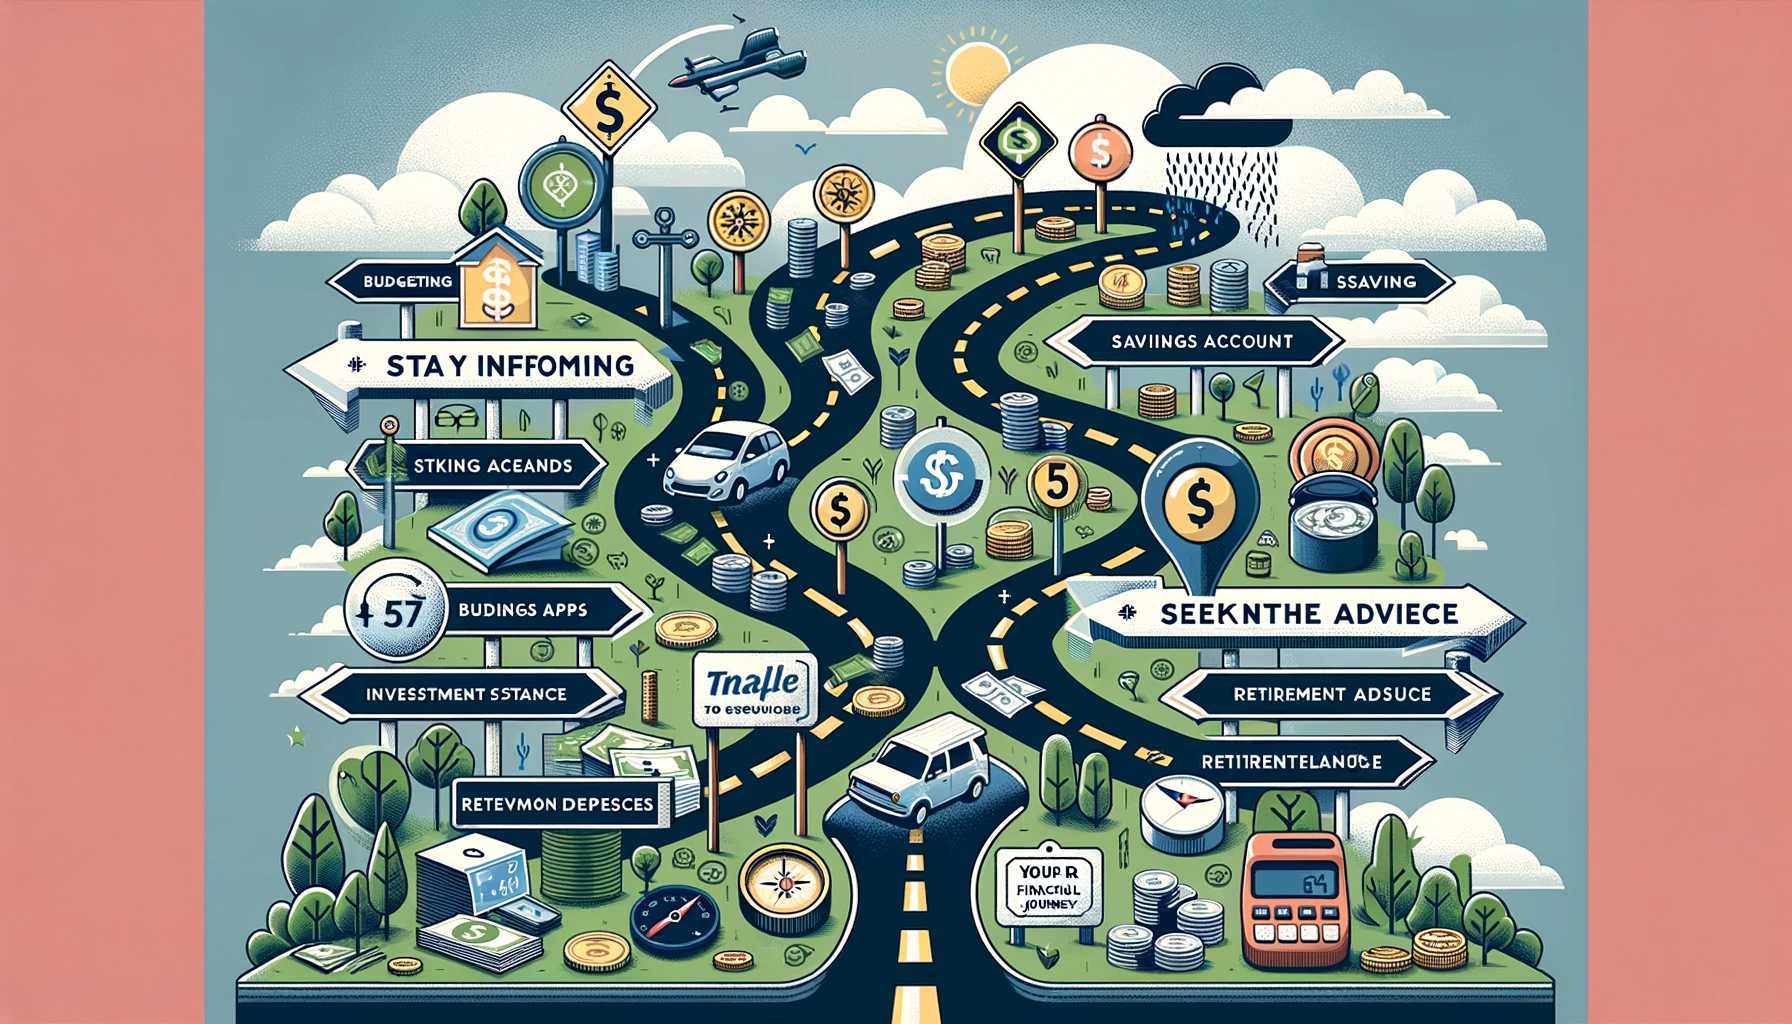 Your Financial Journey: A Guide to Essential Resources and Tools